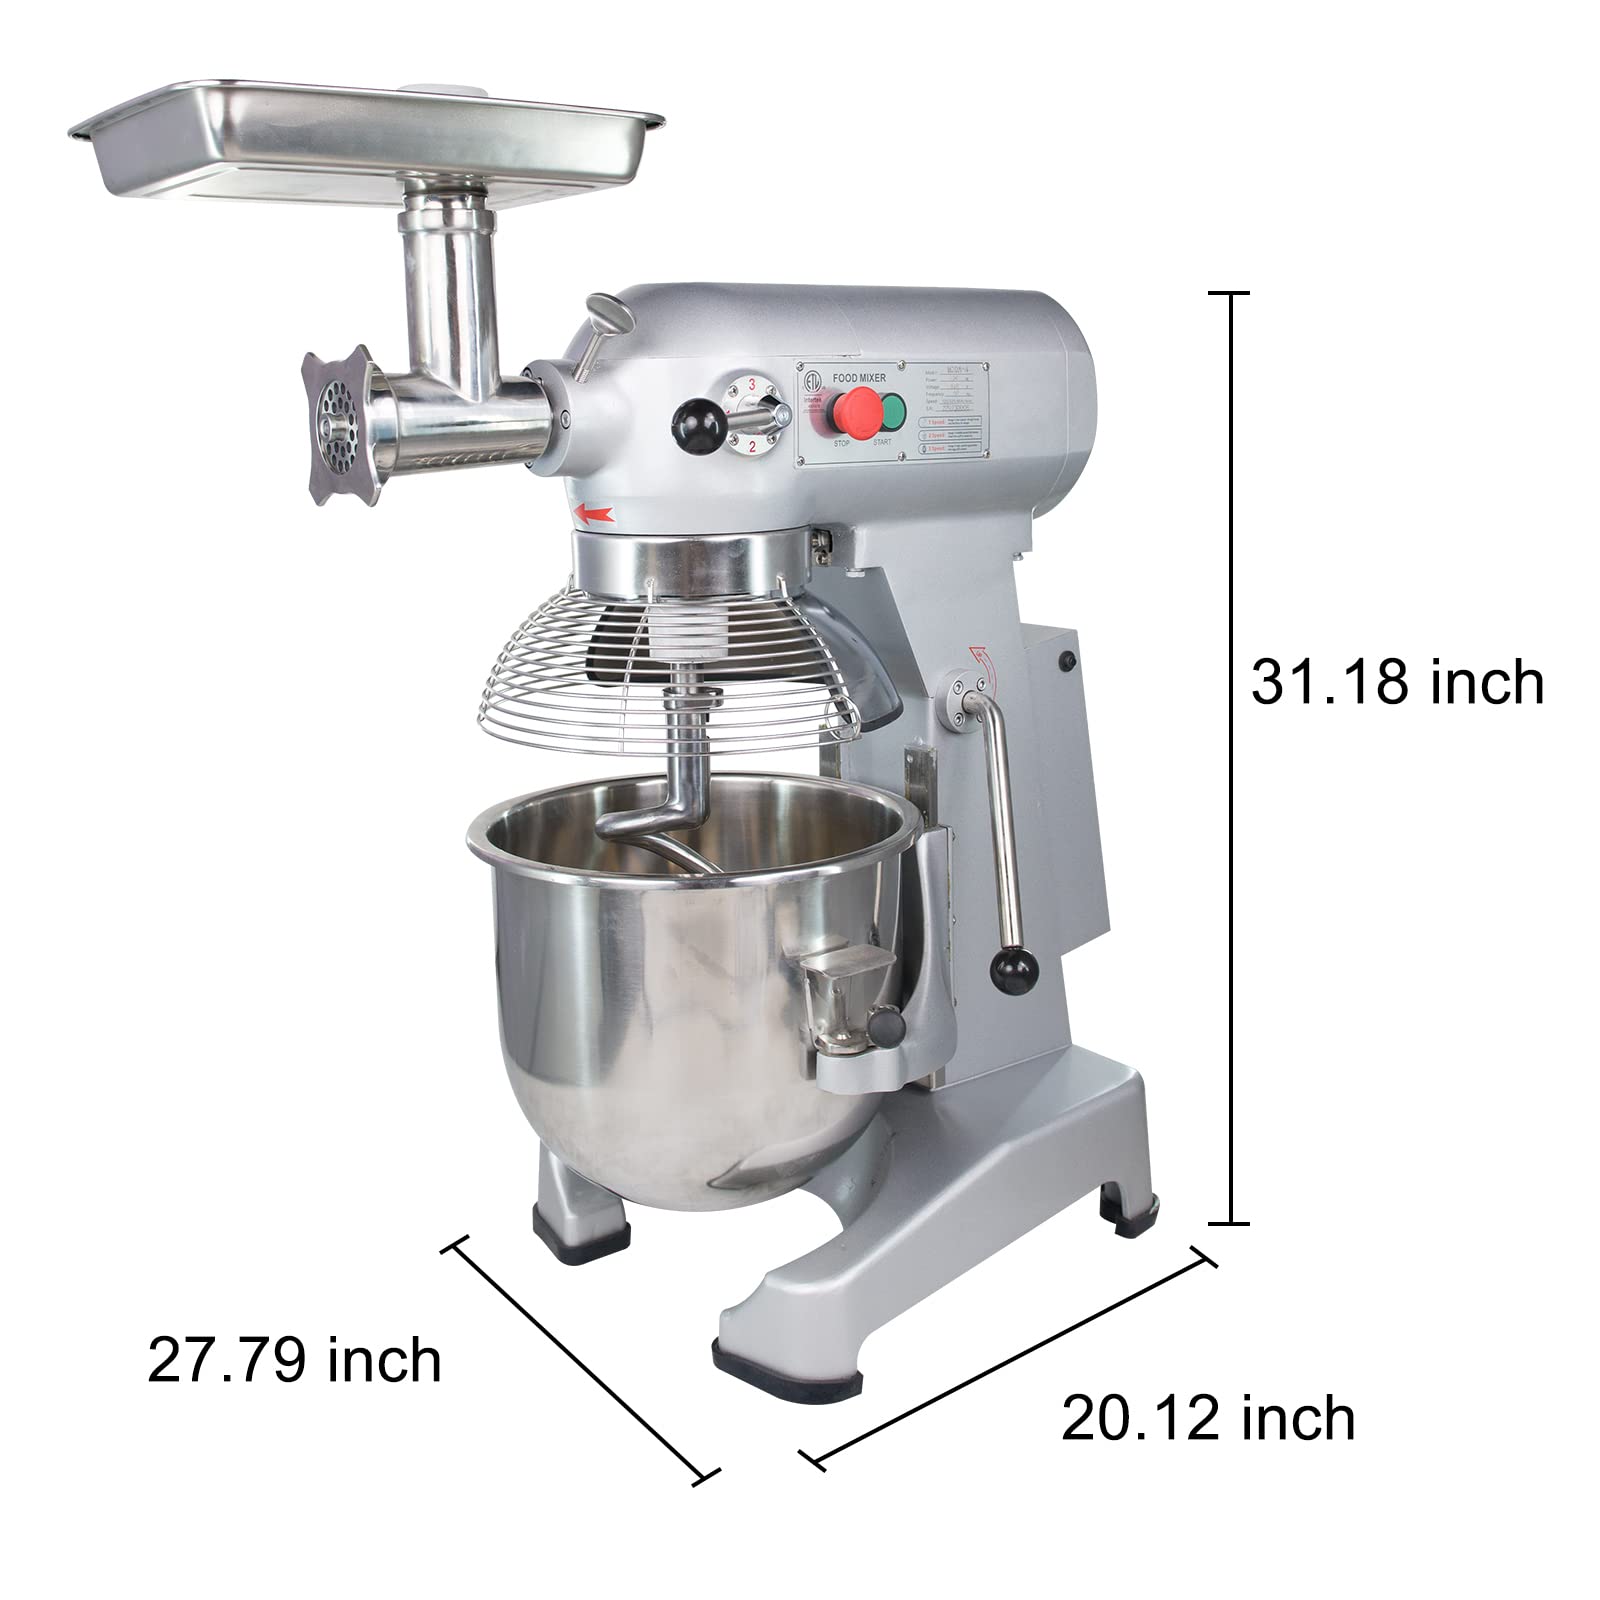 Hakka 20 Quart Commercial Planetary Mixers 4 Funtion Stainless Steel Food Mixer with Meat Grinder Head ,ETL certified